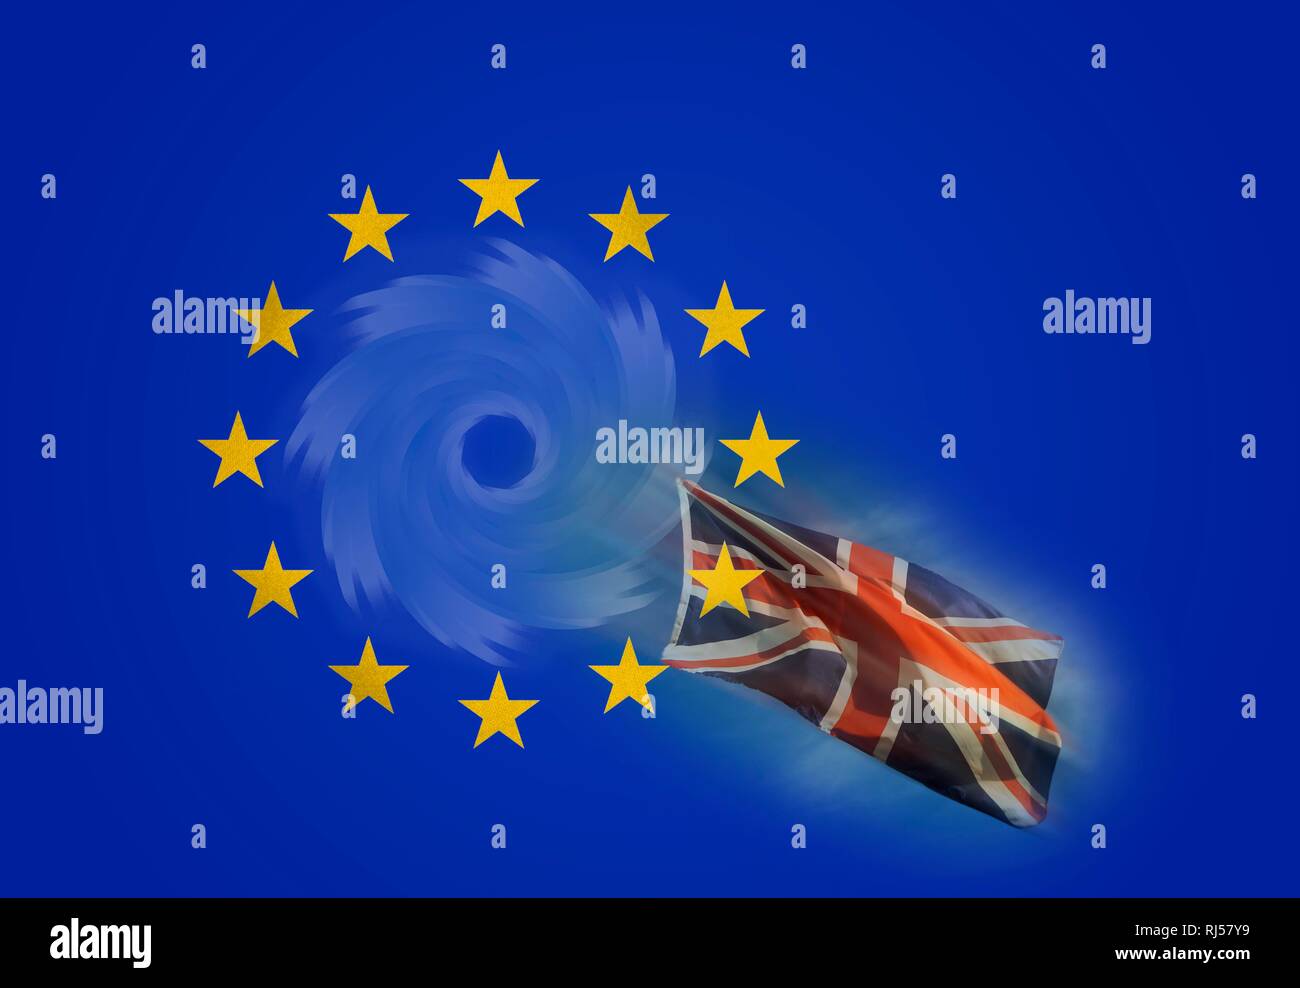 Brexit, Leaving the EU, British flag and stars in the vortex, Germany Stock Photo